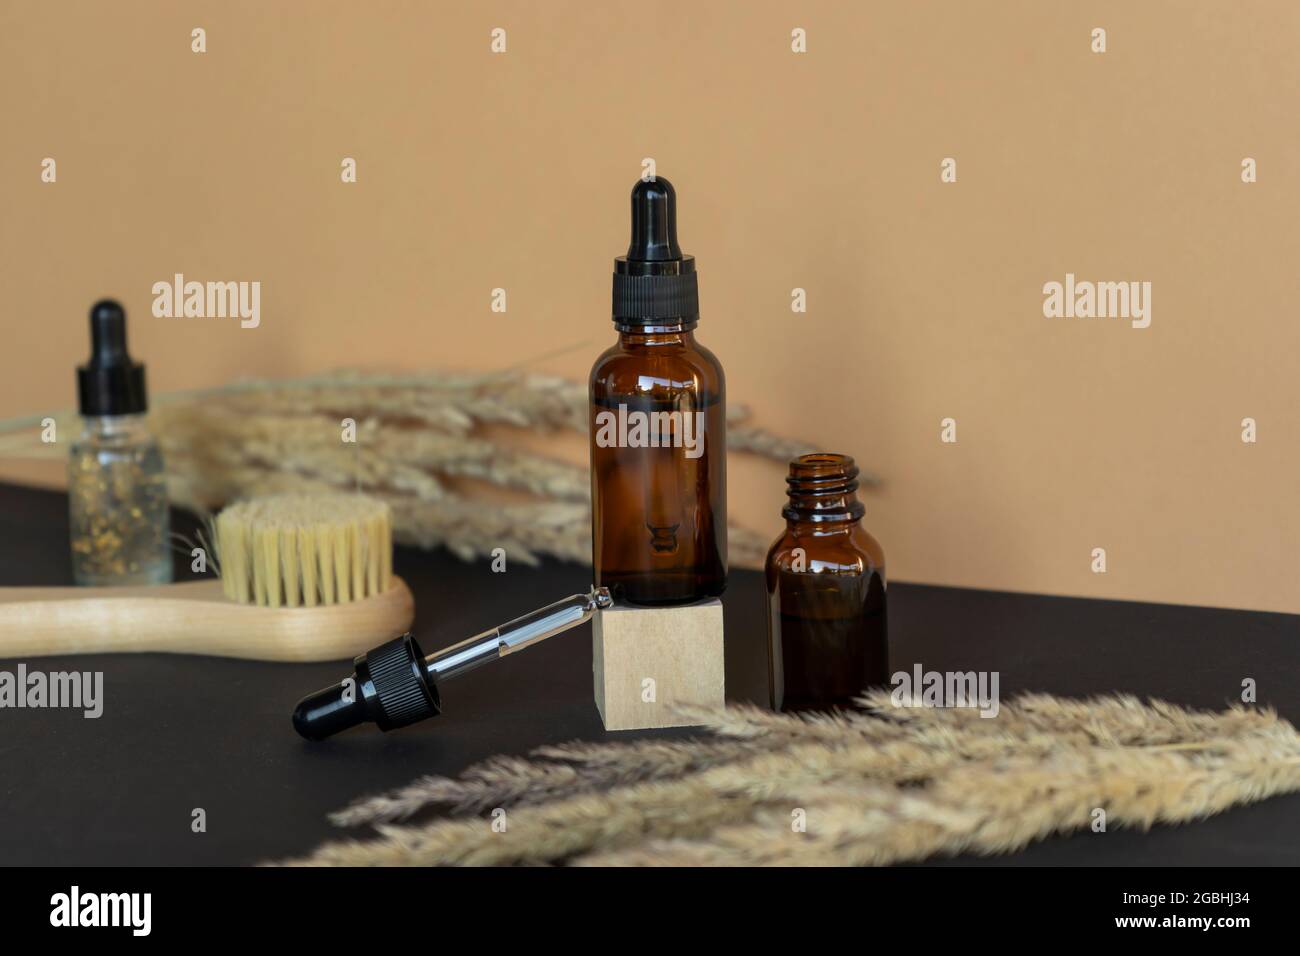 Natural essential oil or serum dropper bottles, natural facial brush lie nearby. Beauty and wellness concept. Unbranded products Stock Photo